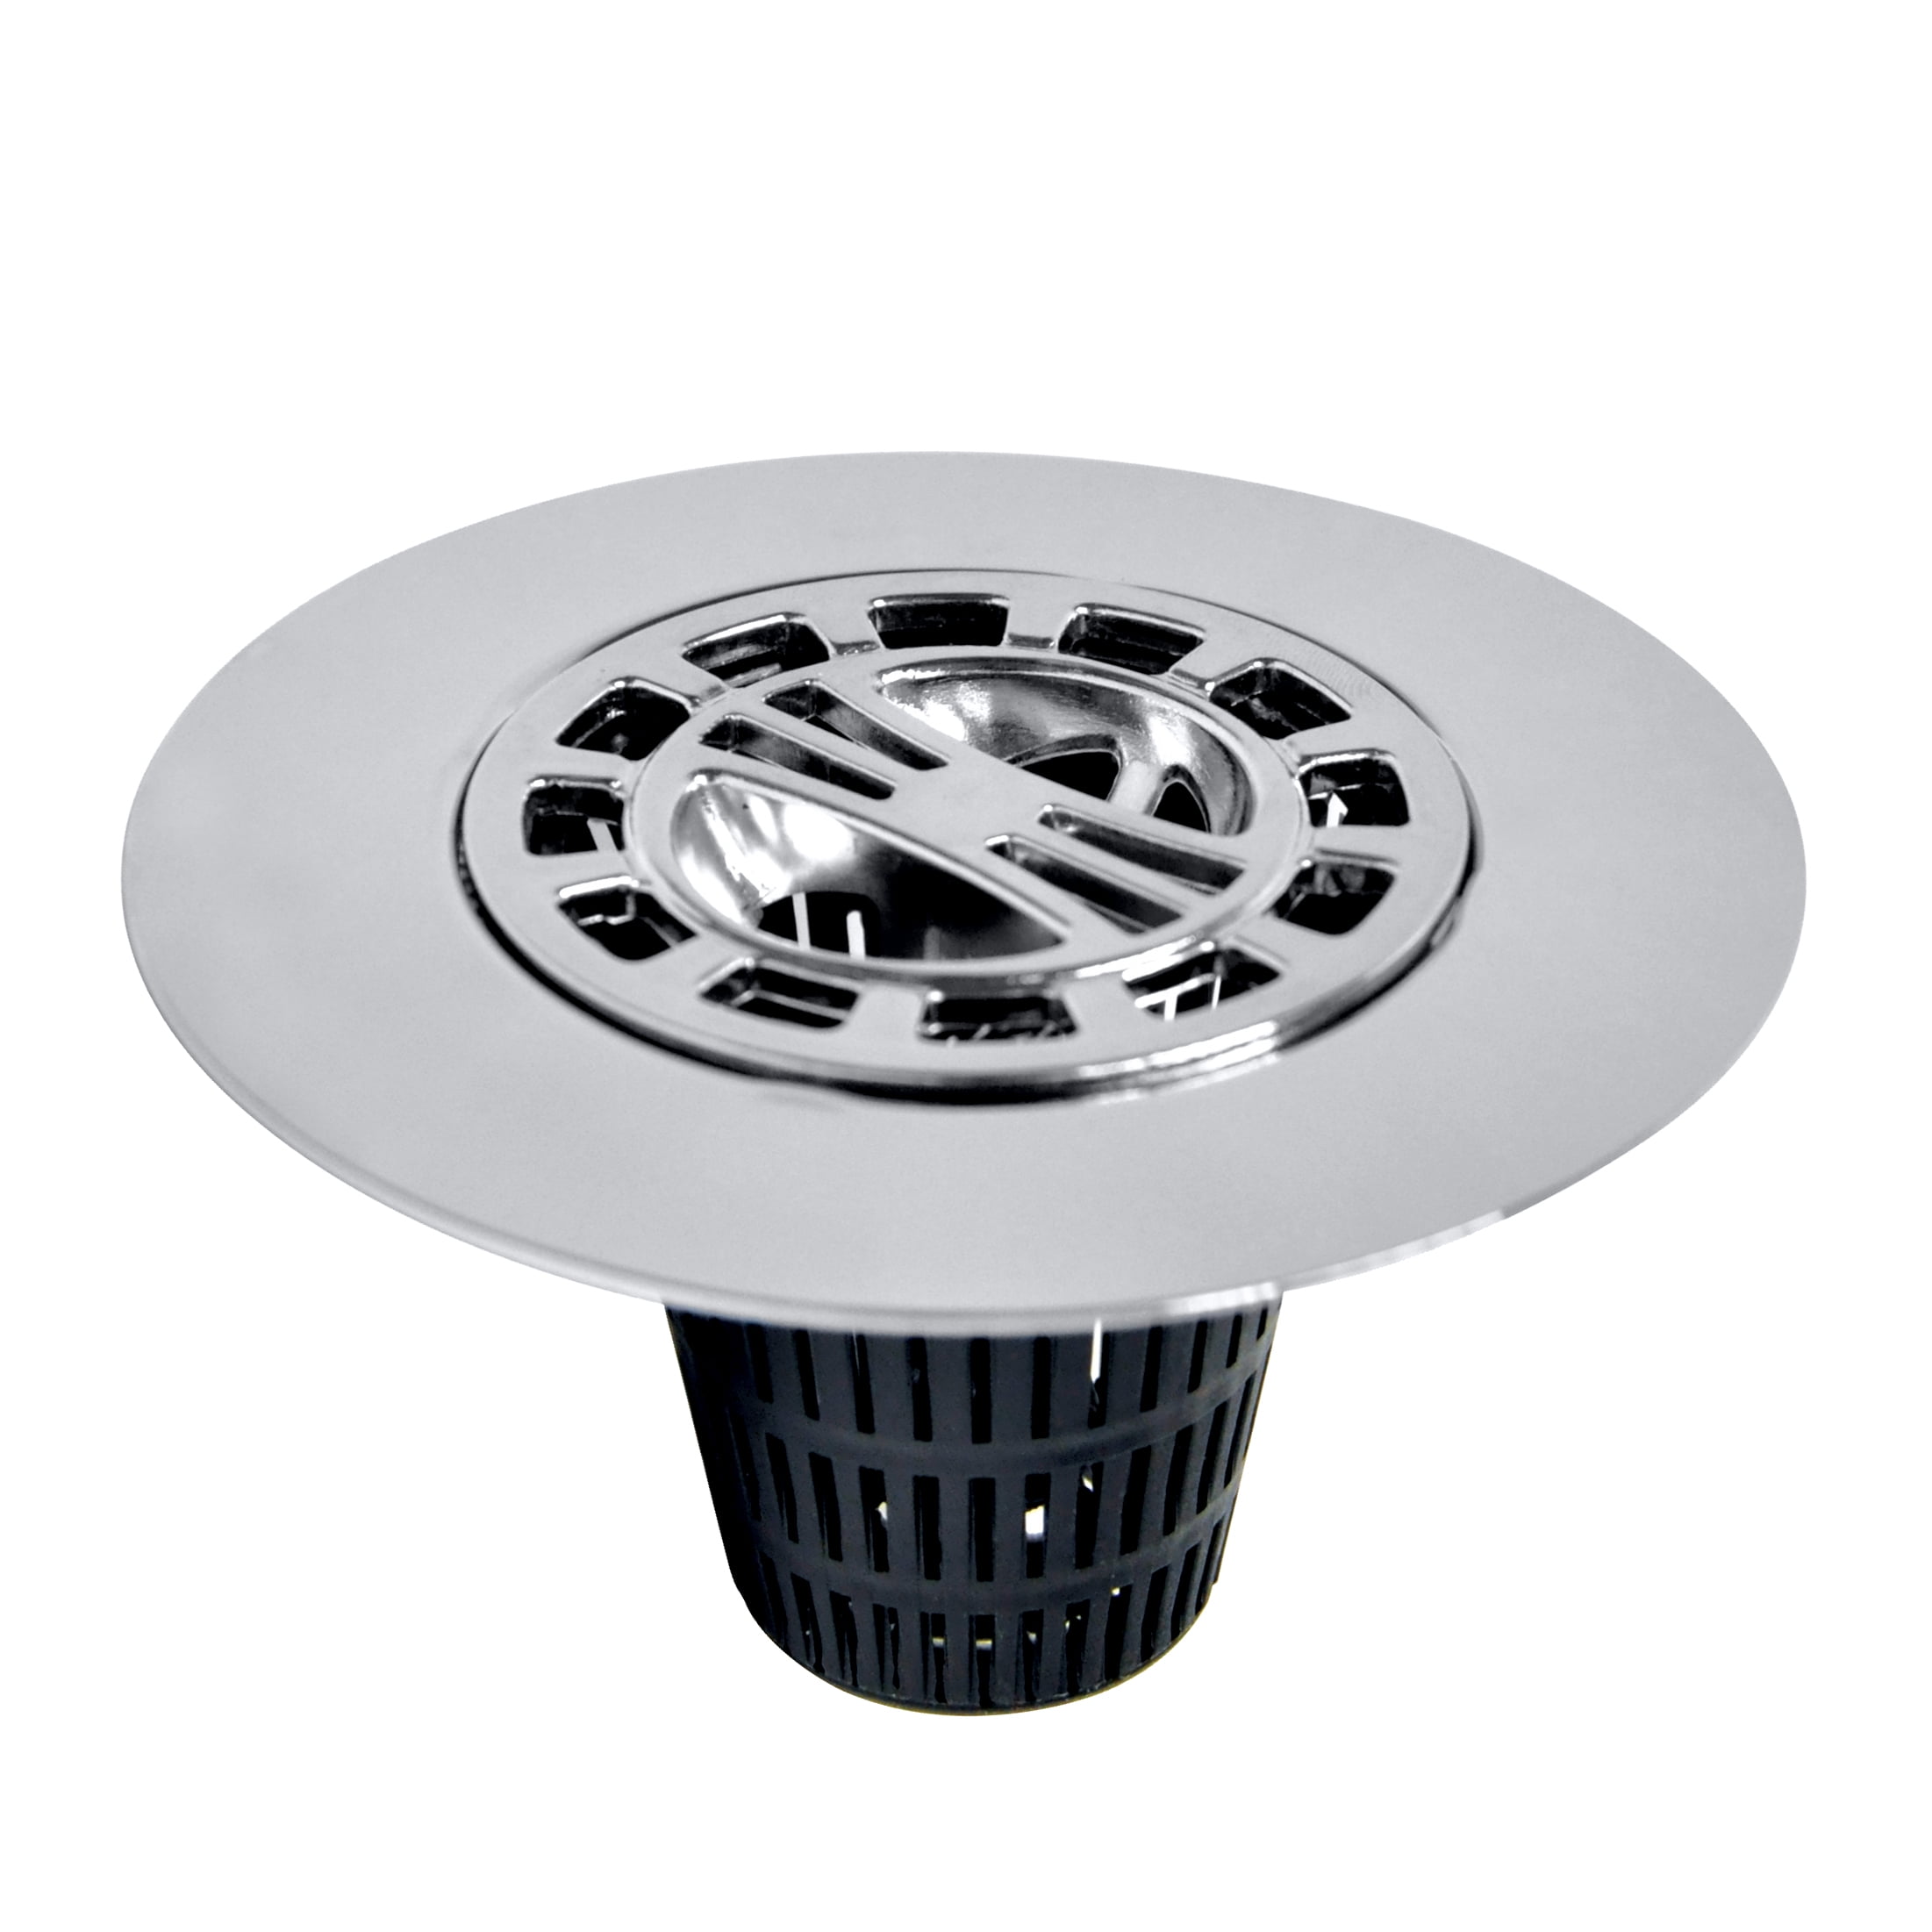 Danco Part # 10306 - Danco Hair Catcher Bathroom Tub Strainer - Tub  Stoppers & Strainers - Home Depot Pro